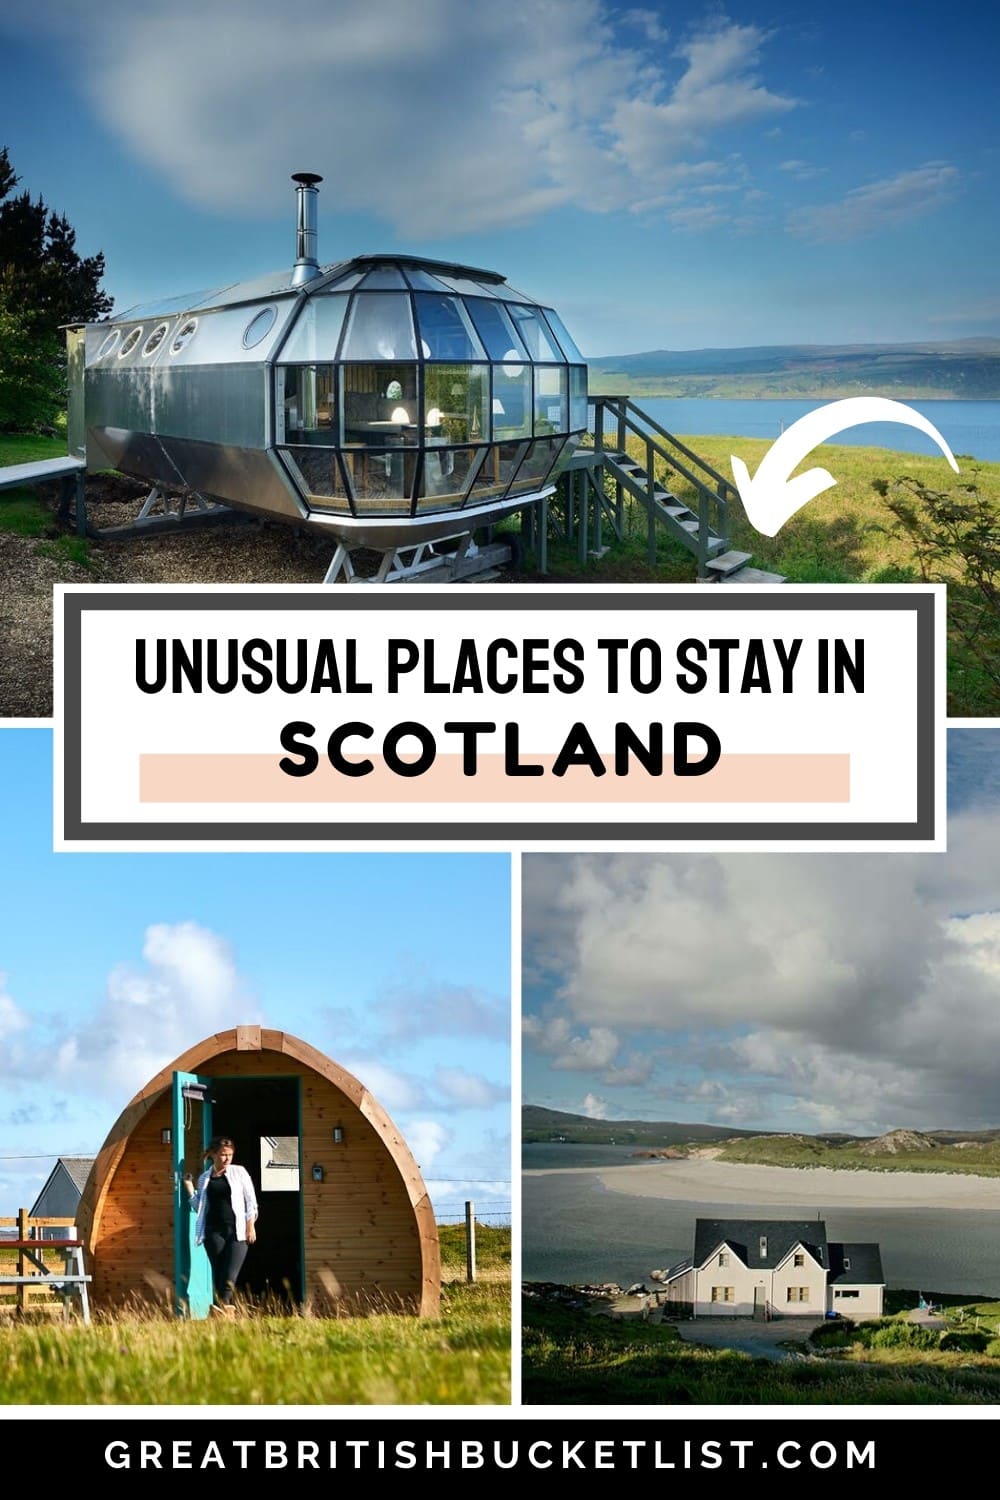 The Most Unusual Places to Stay in Scotland